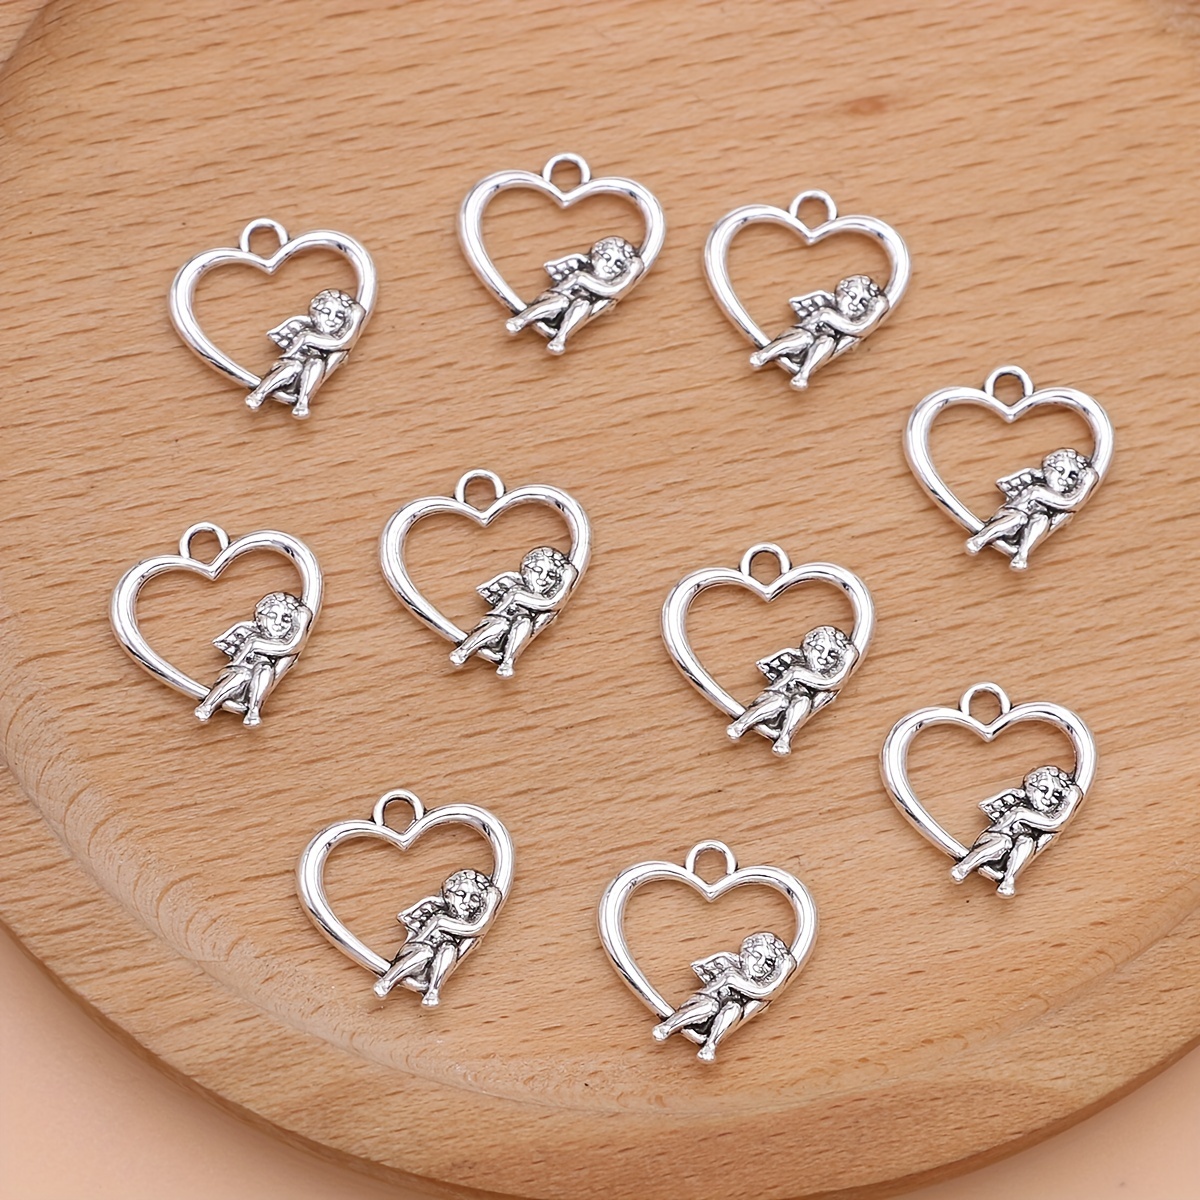 

10pcs Silver Plated Heart Charms With Cupid Pendants For Diy Jewelry Making Handmade Necklace Earrings Key Chain Pendant Accessories